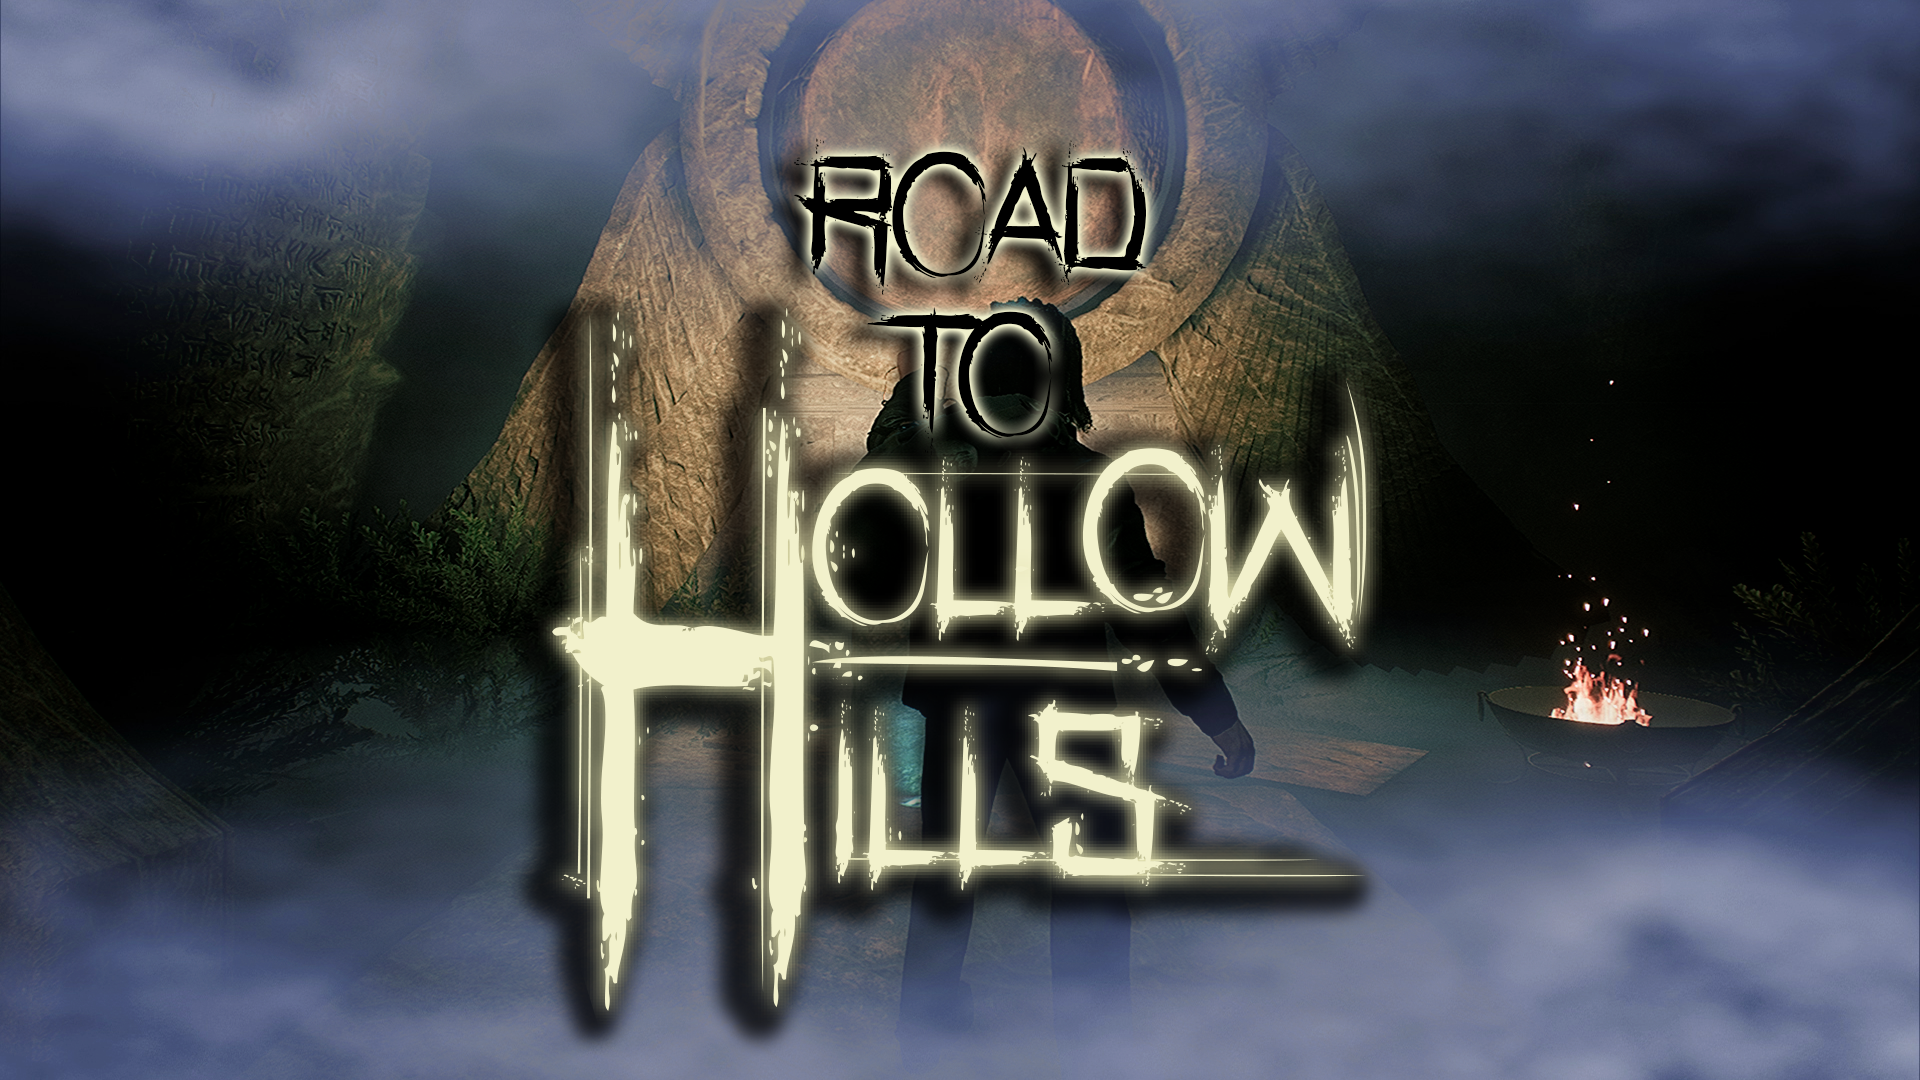 Road to Hollow Hills